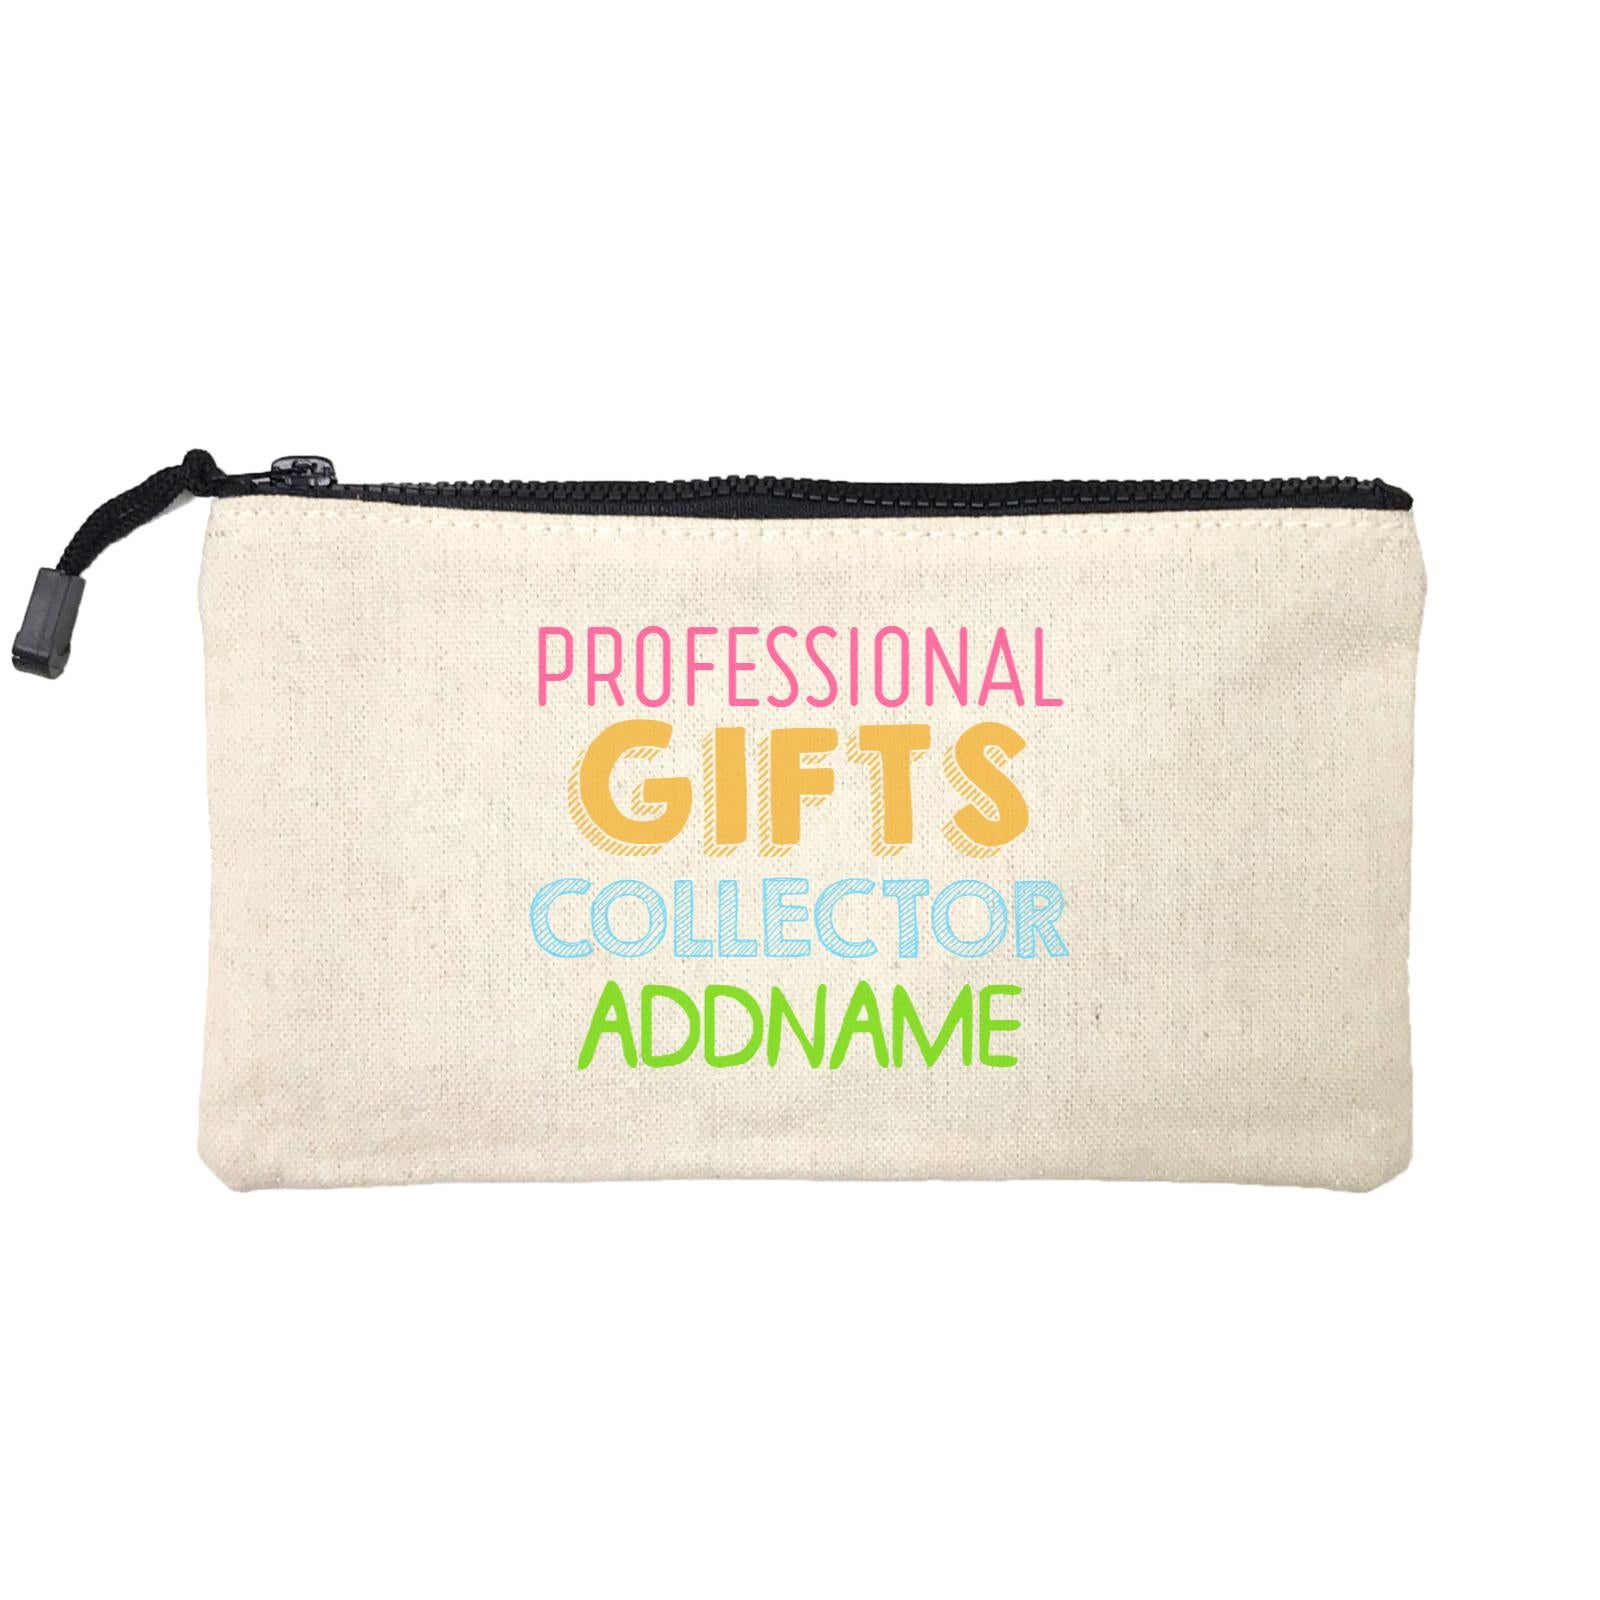 Professional Gifts Collector Addname Mini Accessories Stationery Pouch